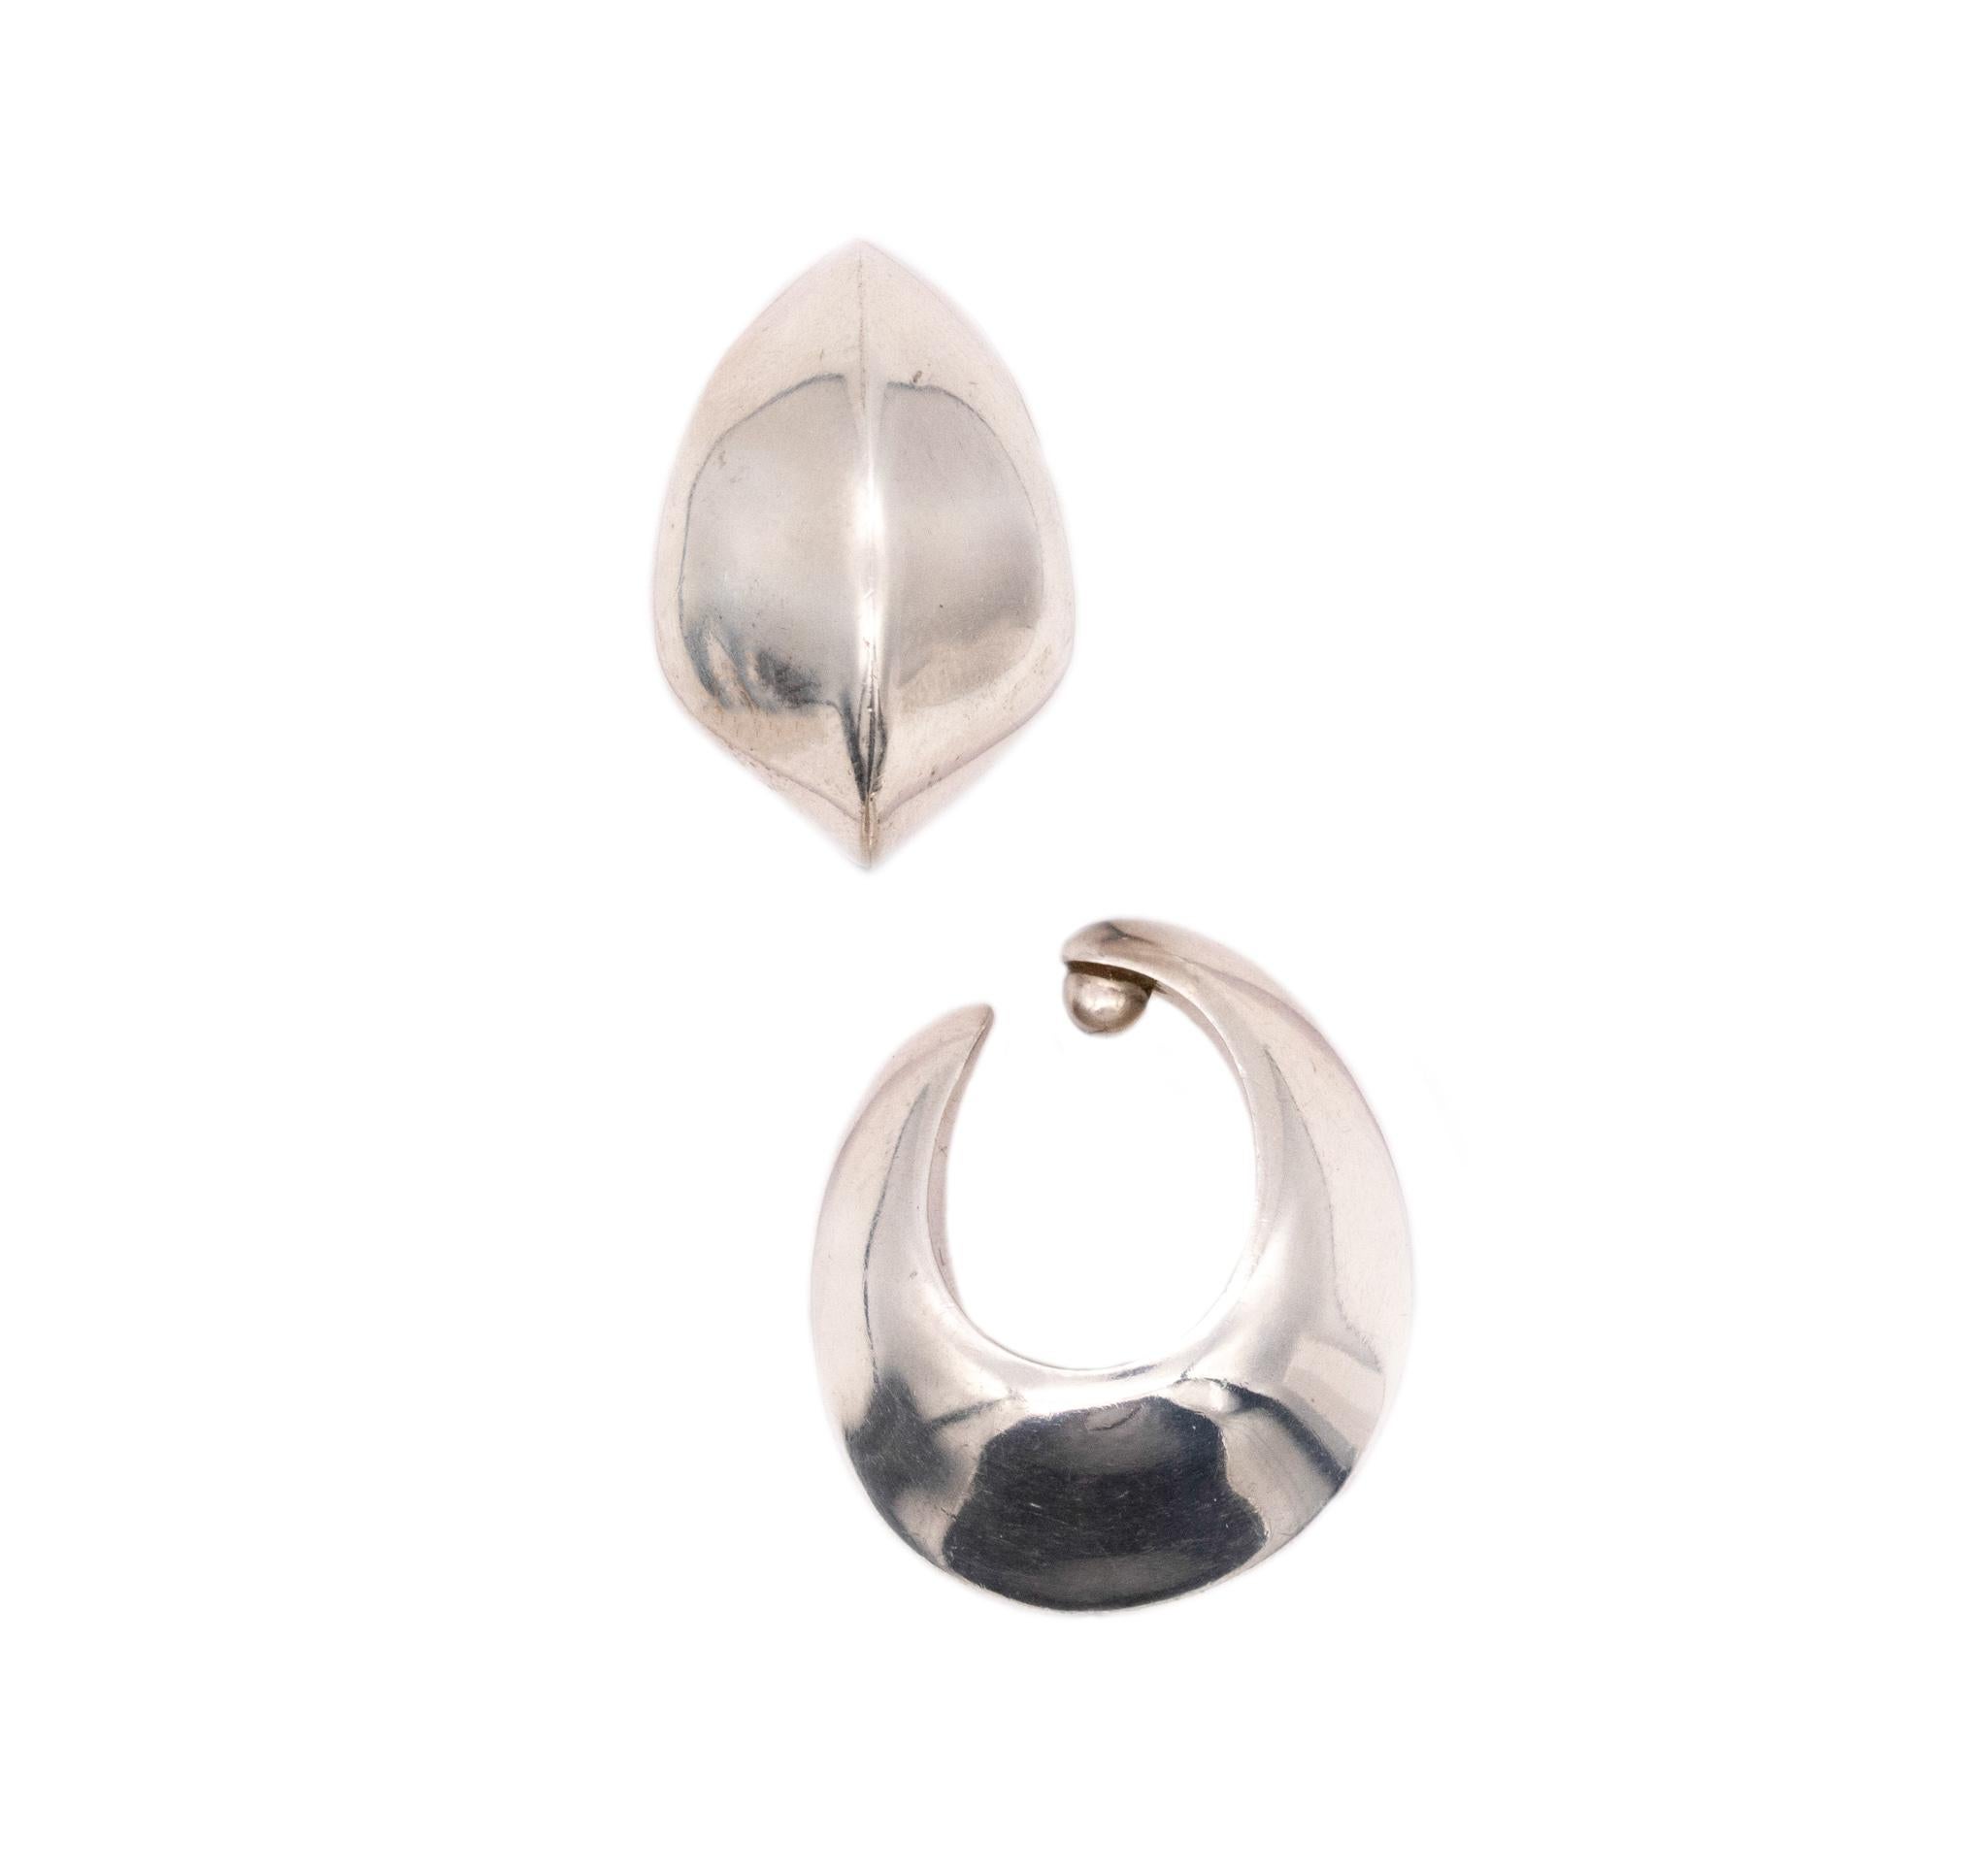 Clips-earrings designed by Nanna Ditzel for Georg Jensen. 

Very rare sculptural pieces, created in Denmark at the Georg Jensen Studios by Nanna Ditzel, back in the 1958. These pair of clips hoops are the model number 378 and was carefully crafted